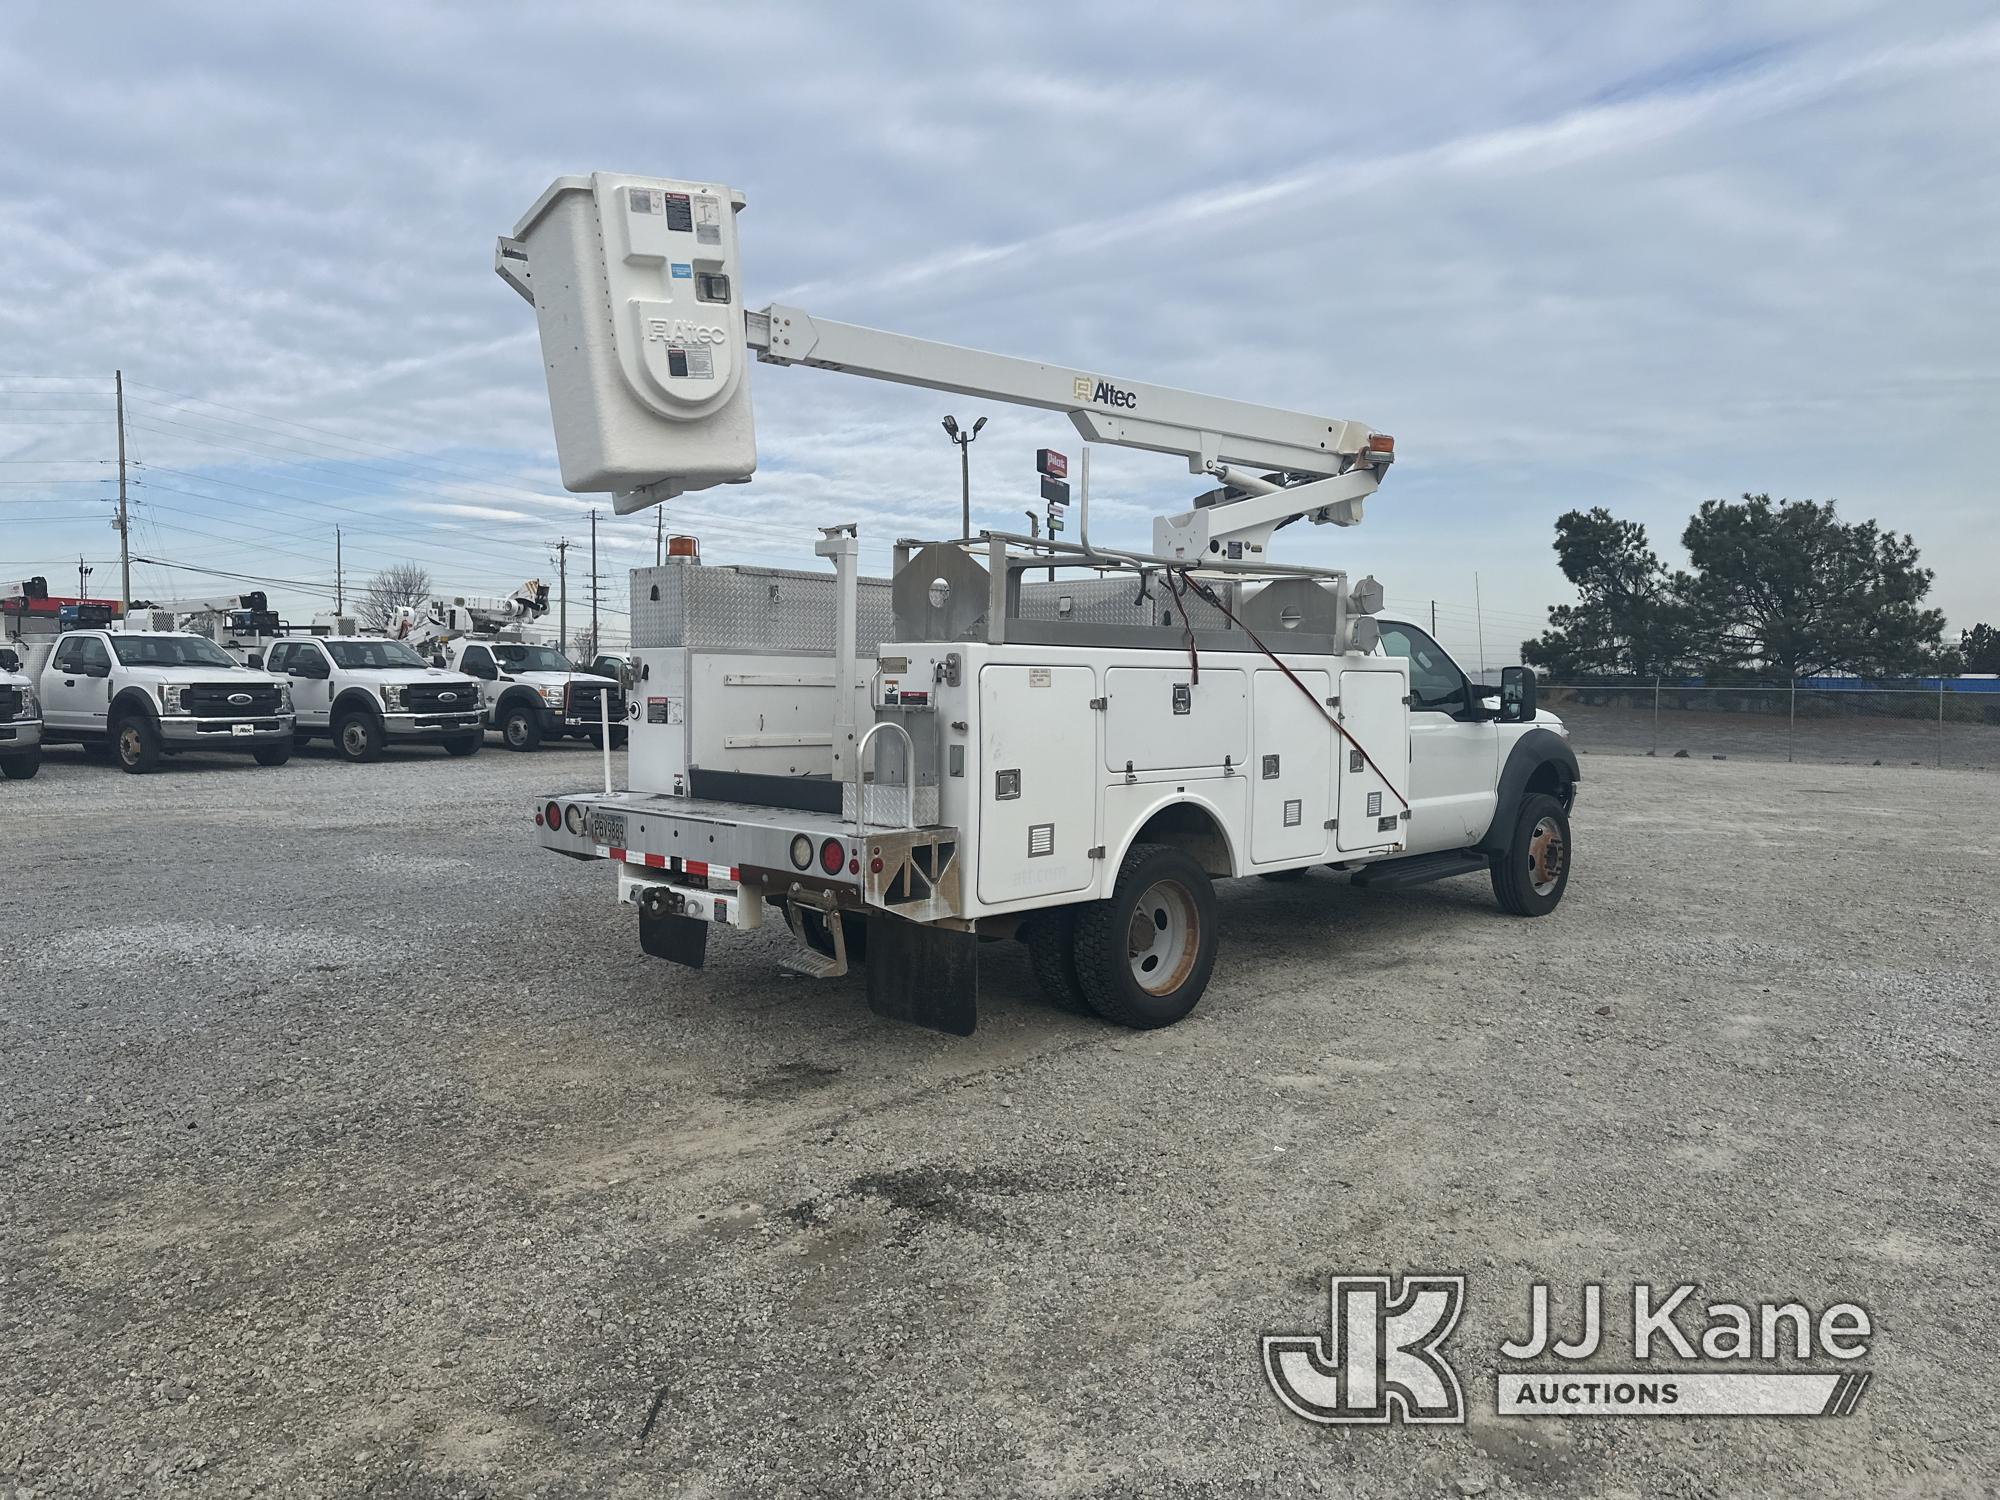 (Villa Rica, GA) Altec AT200-A, Telescopic Non-Insulated Bucket Truck mounted behind cab on 2012 For